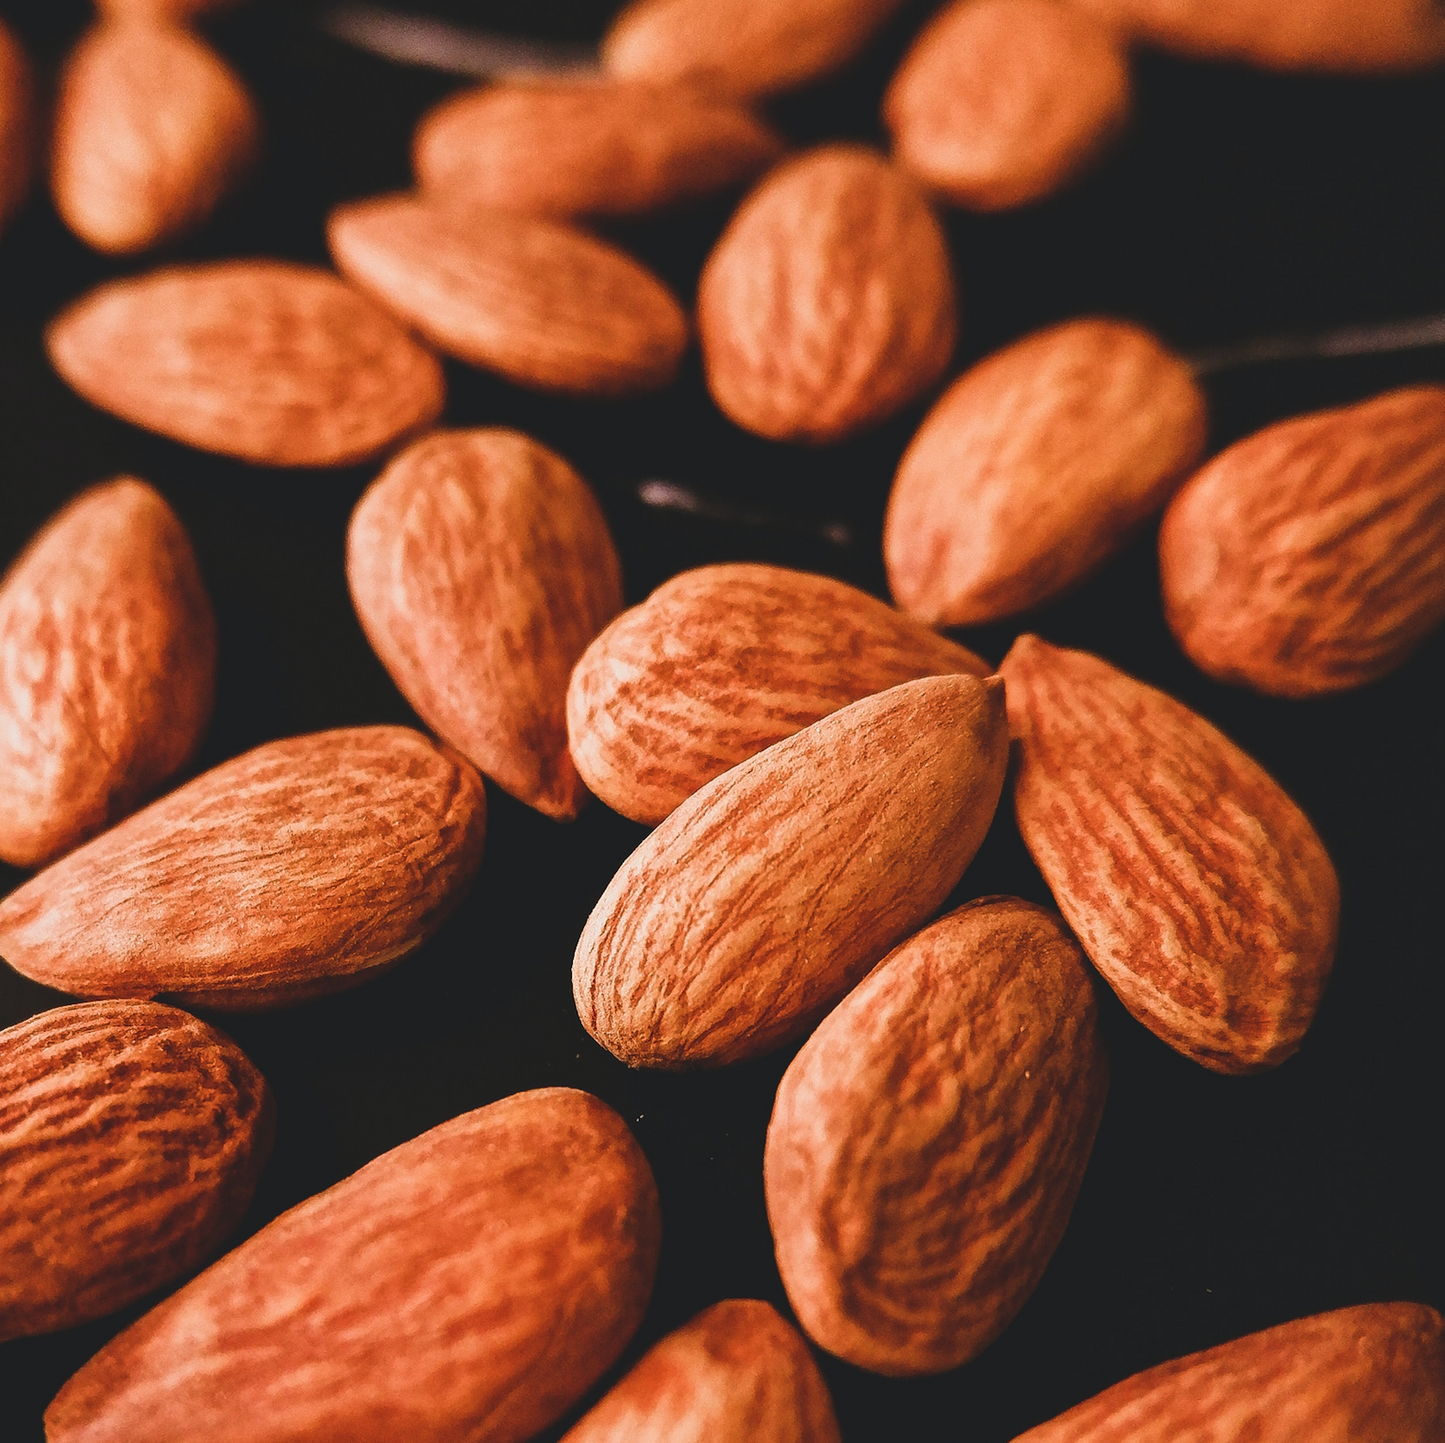 Almonds - Roasted and Diced, California Grown, Organic, "Almond Butter Stock"